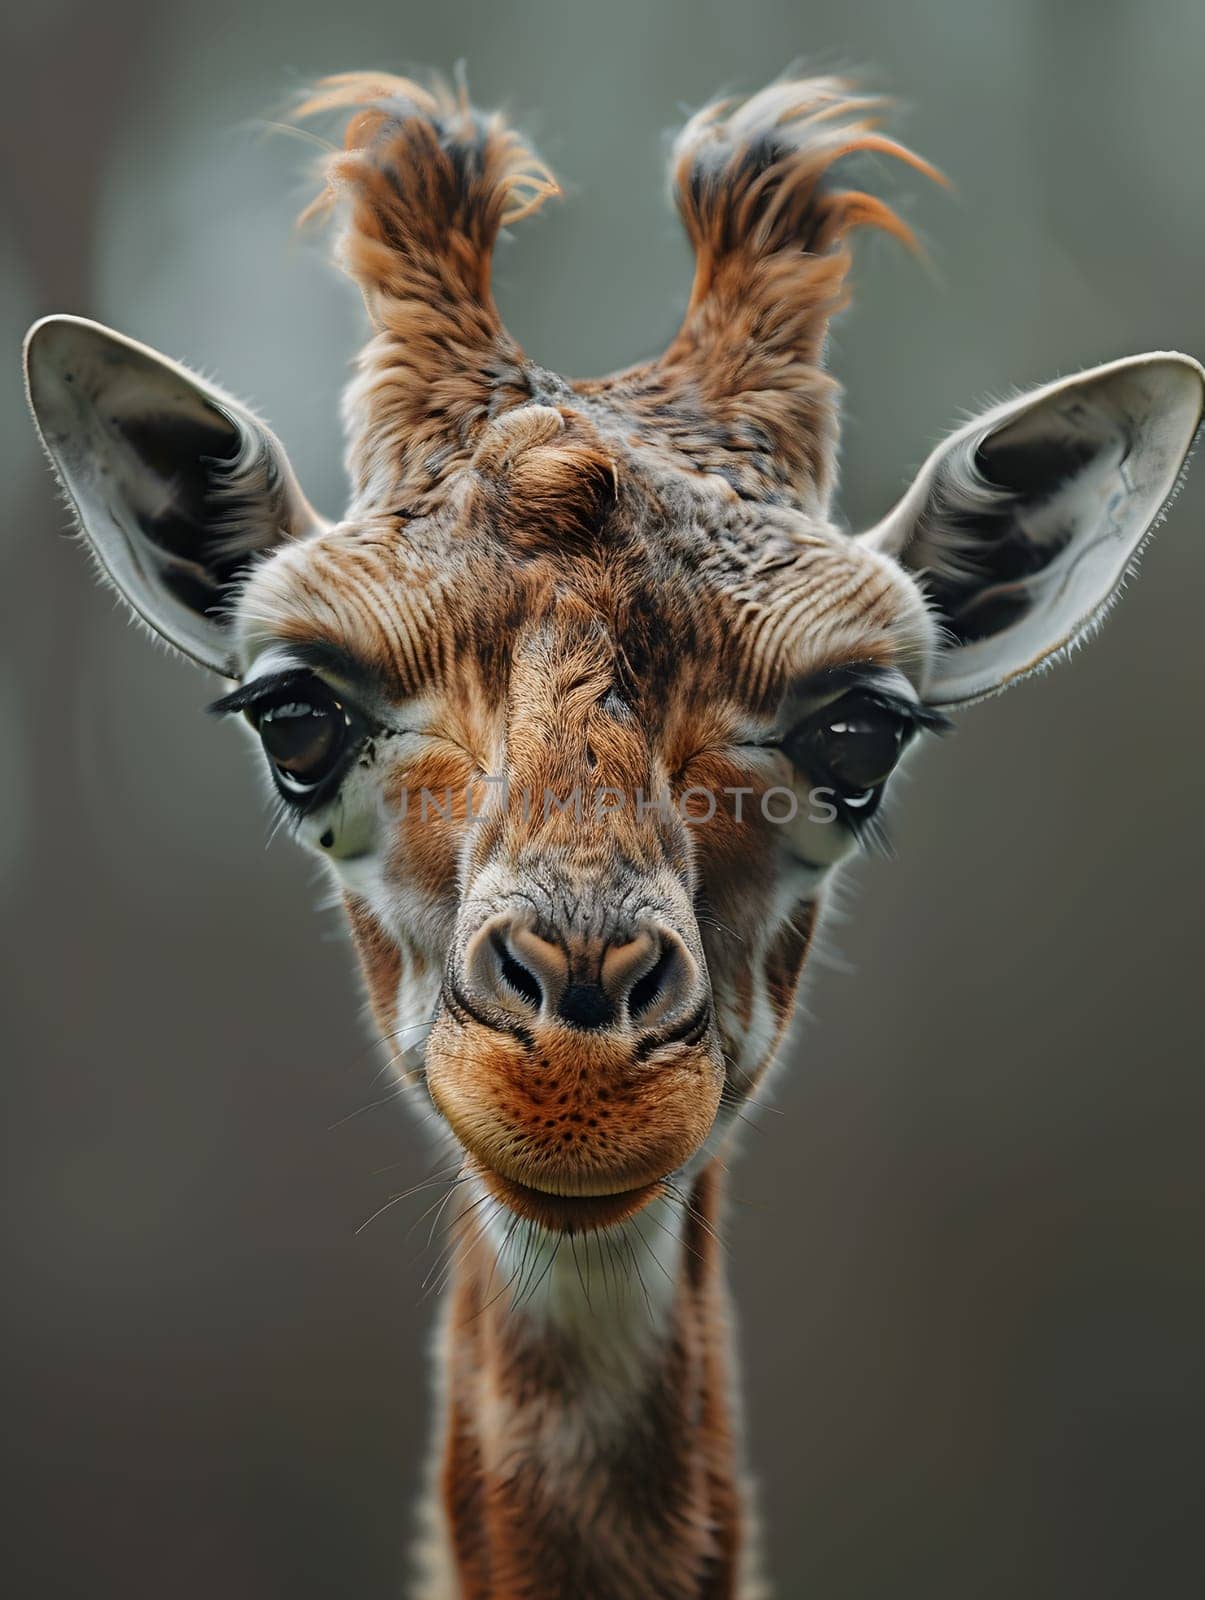 Closeup of a Giraffidaes eye staring into the camera by Nadtochiy